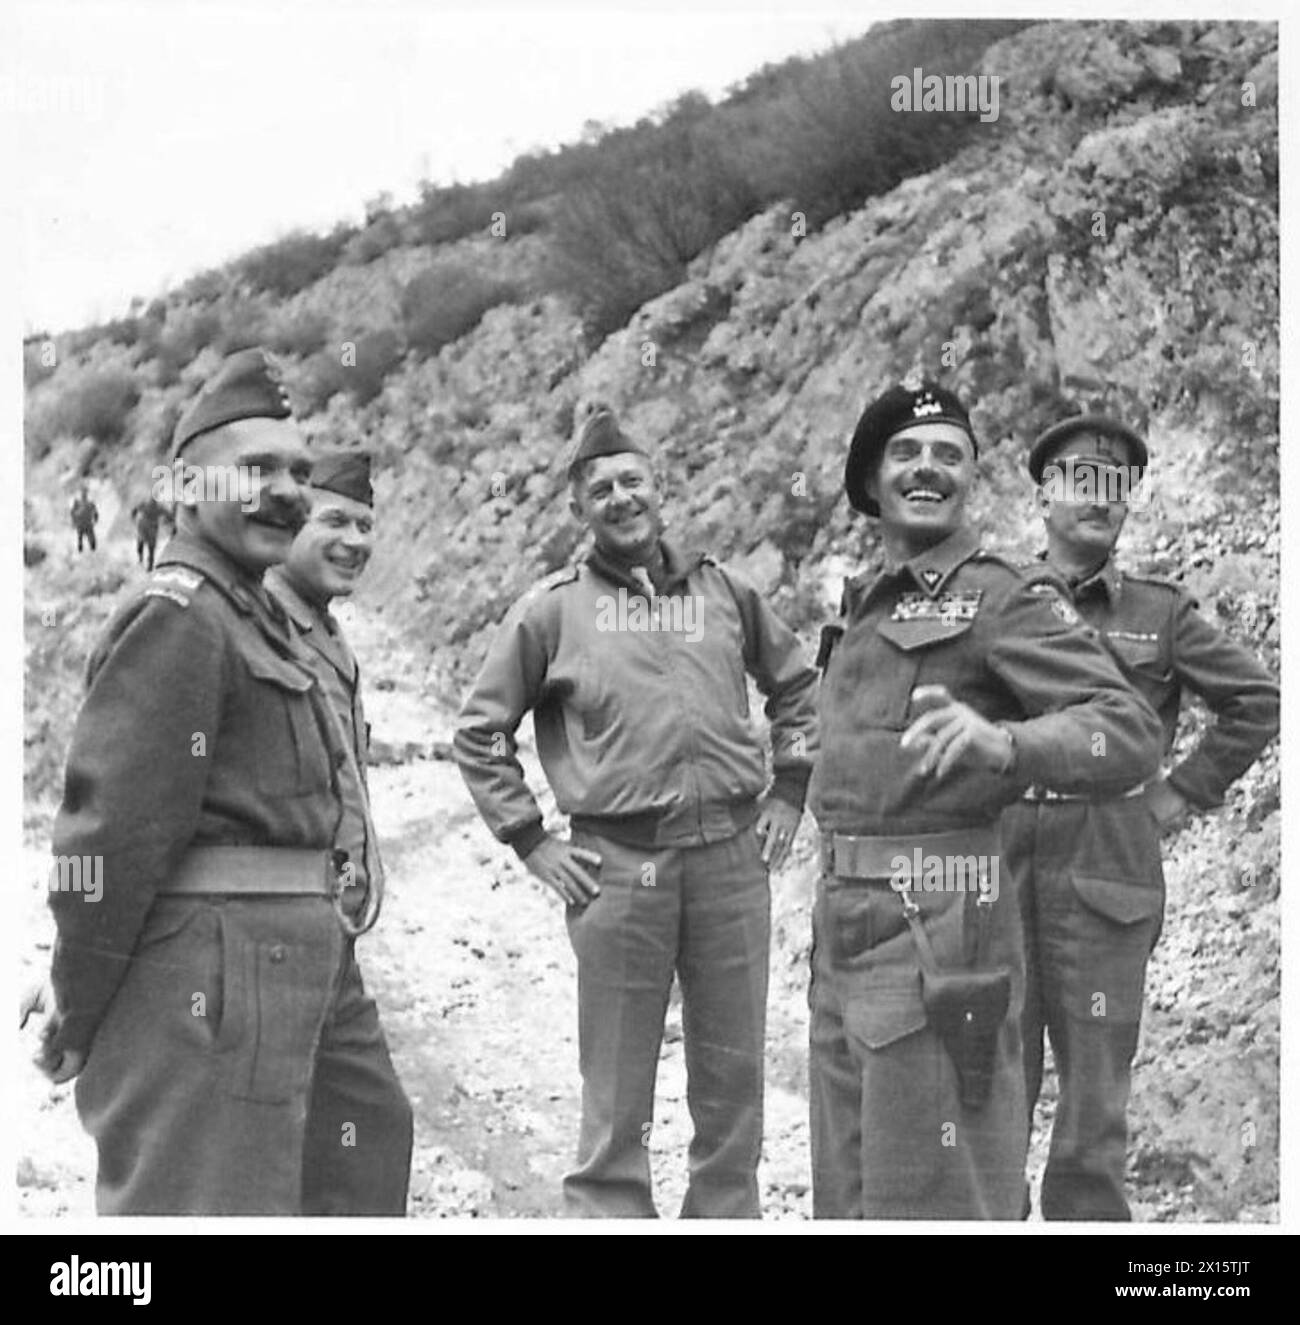 ALLIED ARMIES IN THE ITALIAN CAMPAIGN, 1943-1945 - From left to right: General Nikodem Sulik, the CO of the 5th Kresowa Division, unknown American officer, General Jacob Devers, the Deputy Supreme Allied Commander of the Mediterranean Theatre, General Władysław Anders, the CO of the 2nd Polish Corps, and Brigadier Eric Herbert Cokayne Frith, British Liaison Officer with the 2nd Polish Corps, pause for a rest when climbing to an observation post to watch a small scale exercise by Polish infantry (probably soldiers of the 6th 'Lwów' Infantry Brigade).Photograph taken during one of General Devers Stock Photo